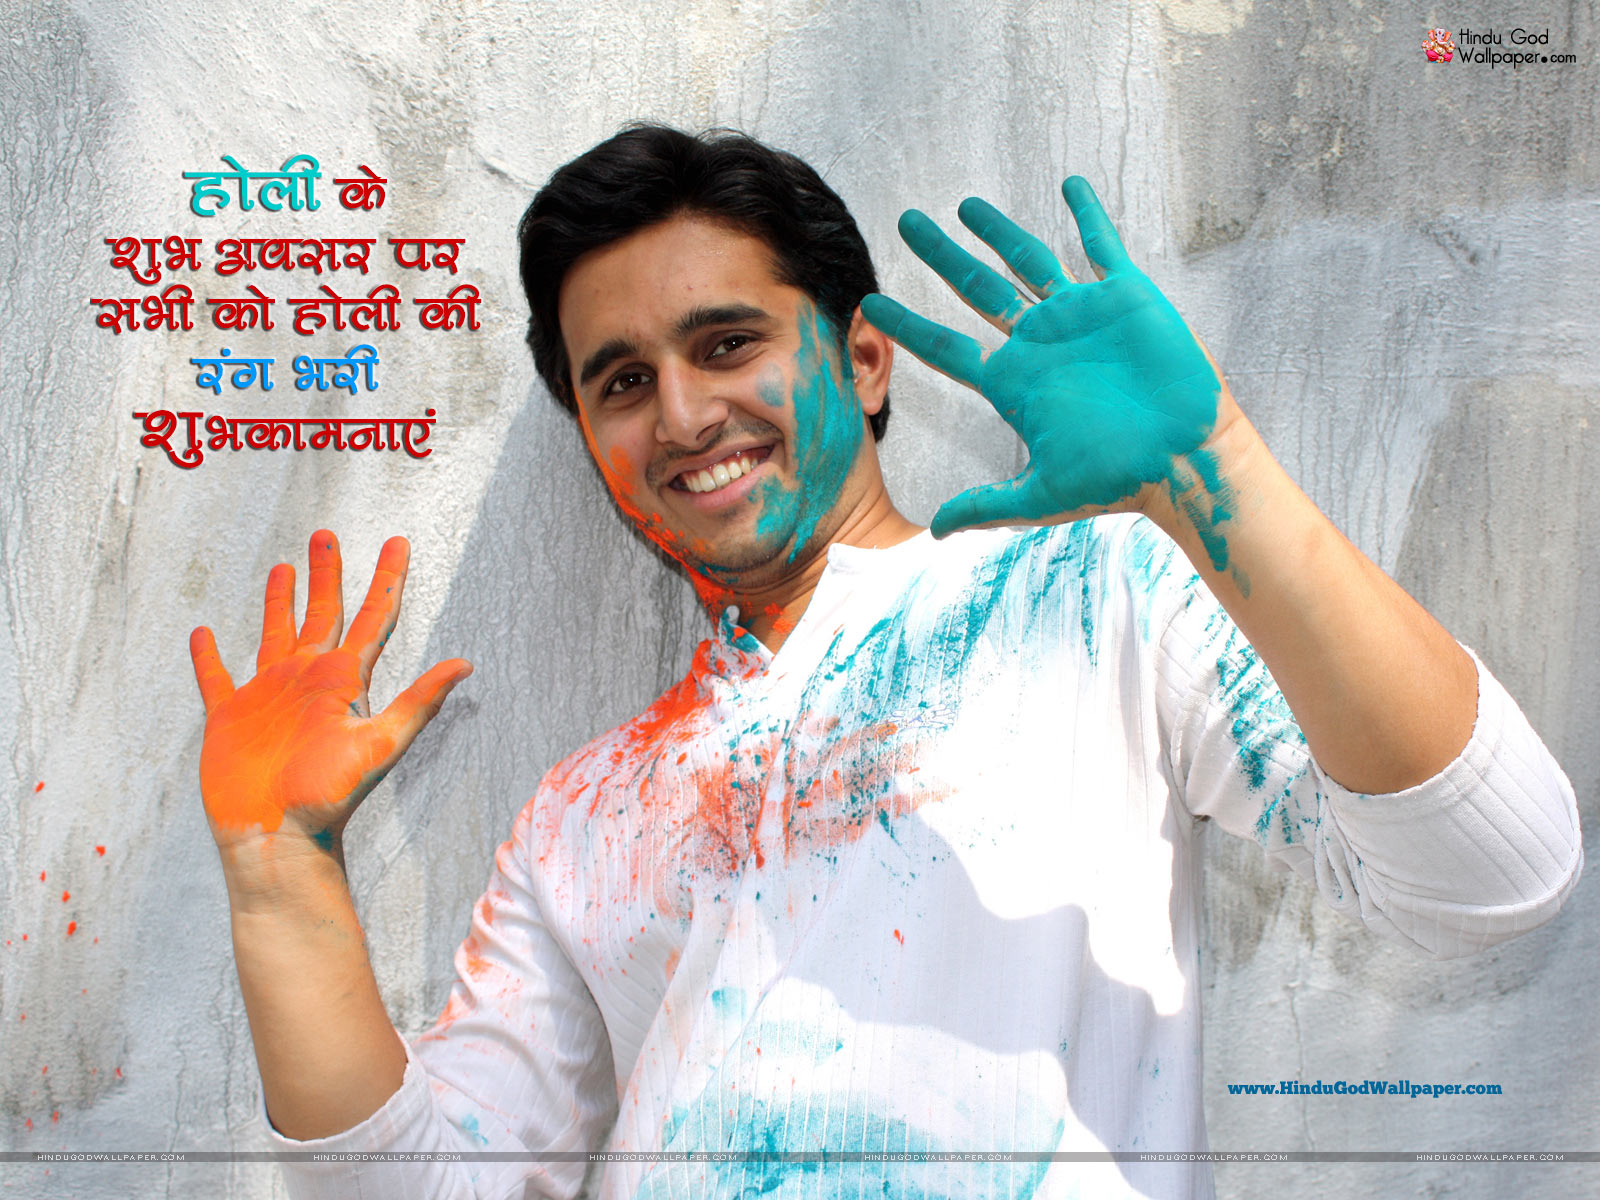 Holi Wallpaper with Hindi Quotes Free Download